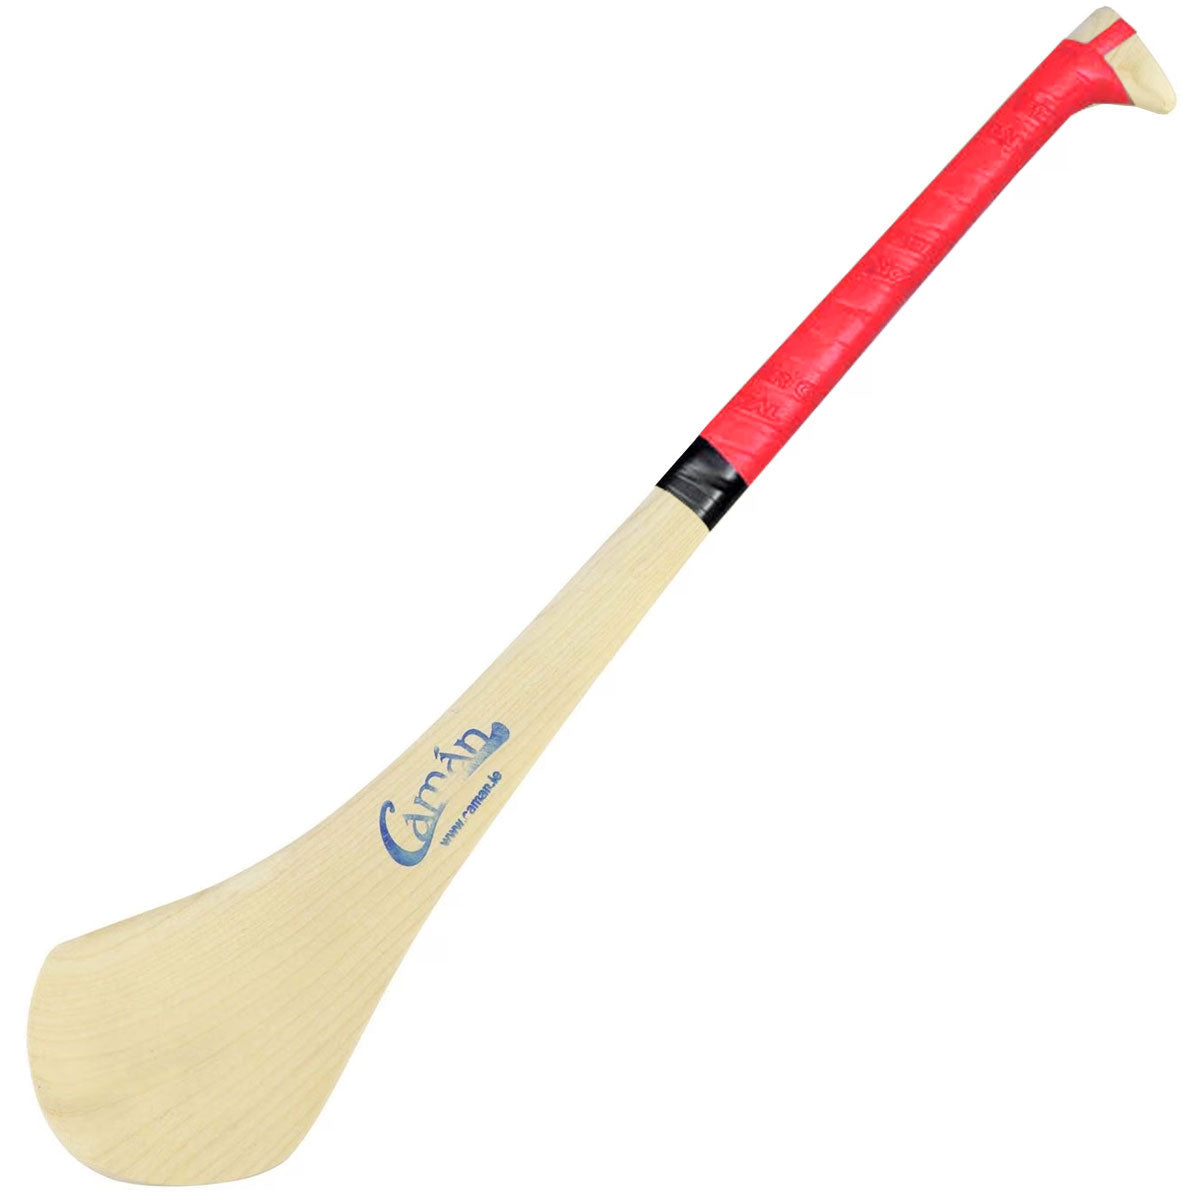 Caman Hurling Stick size 28 (Inches)